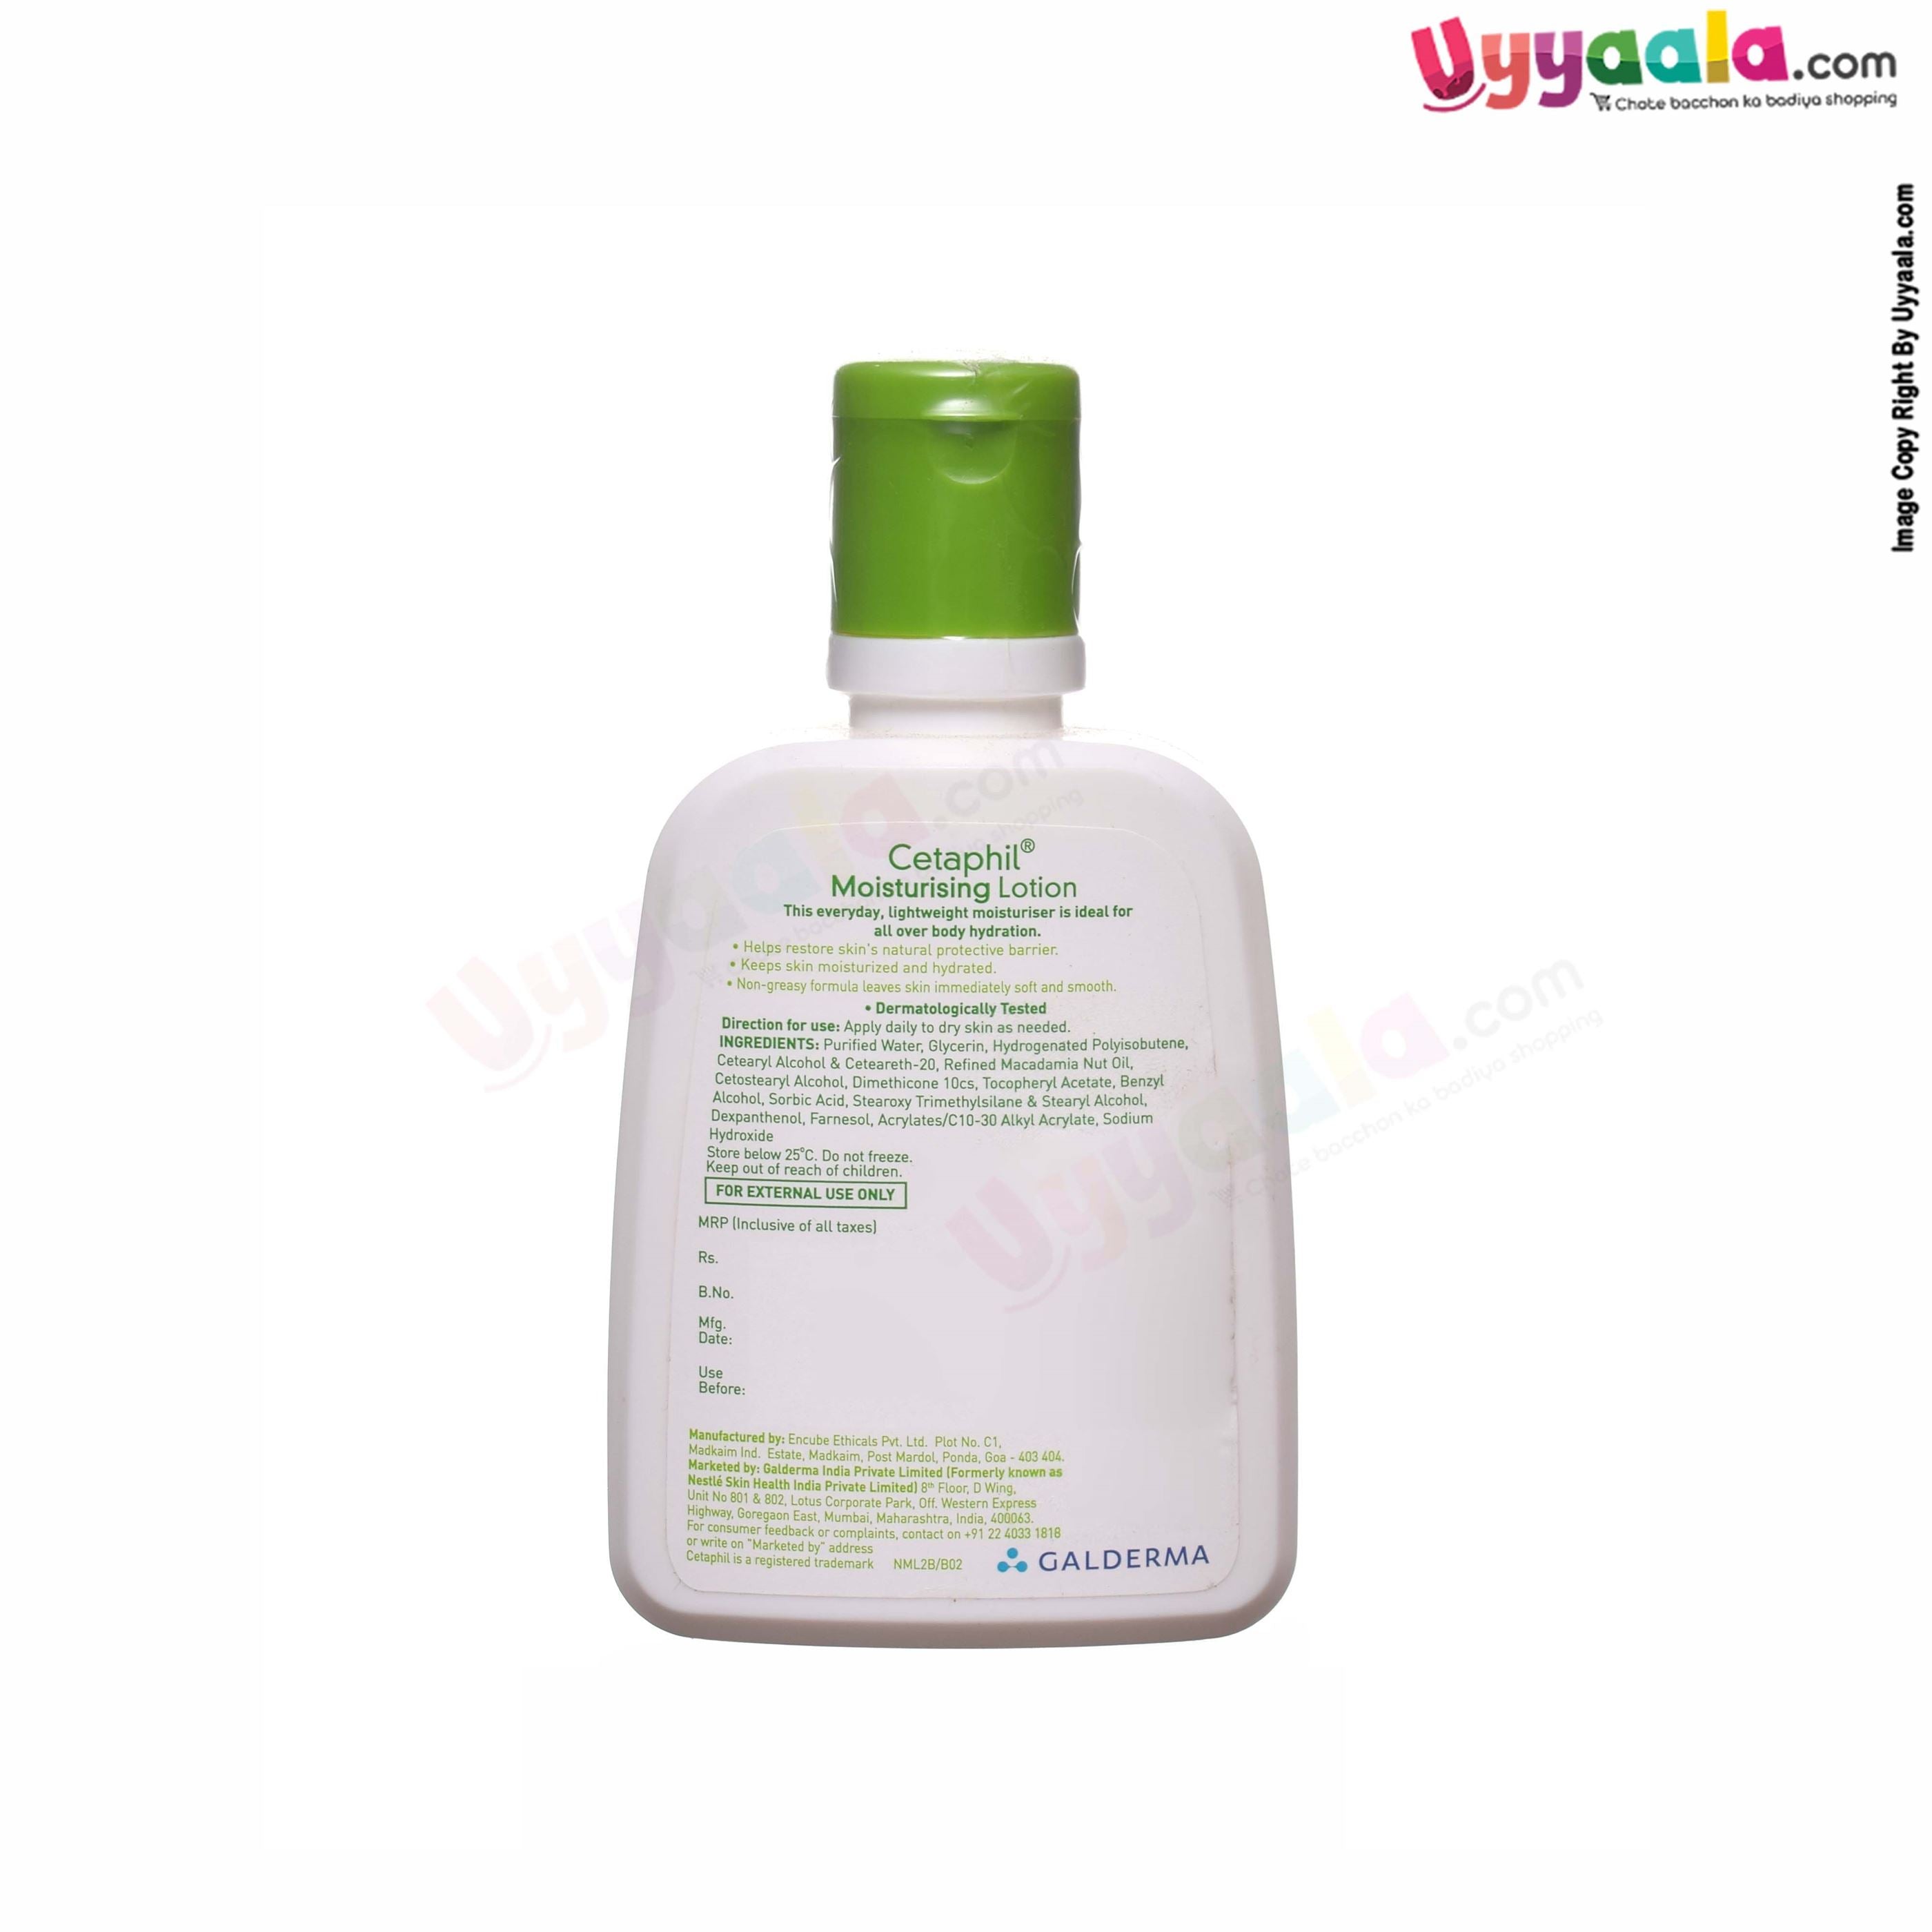 Moisturizing baby lotion for face and body